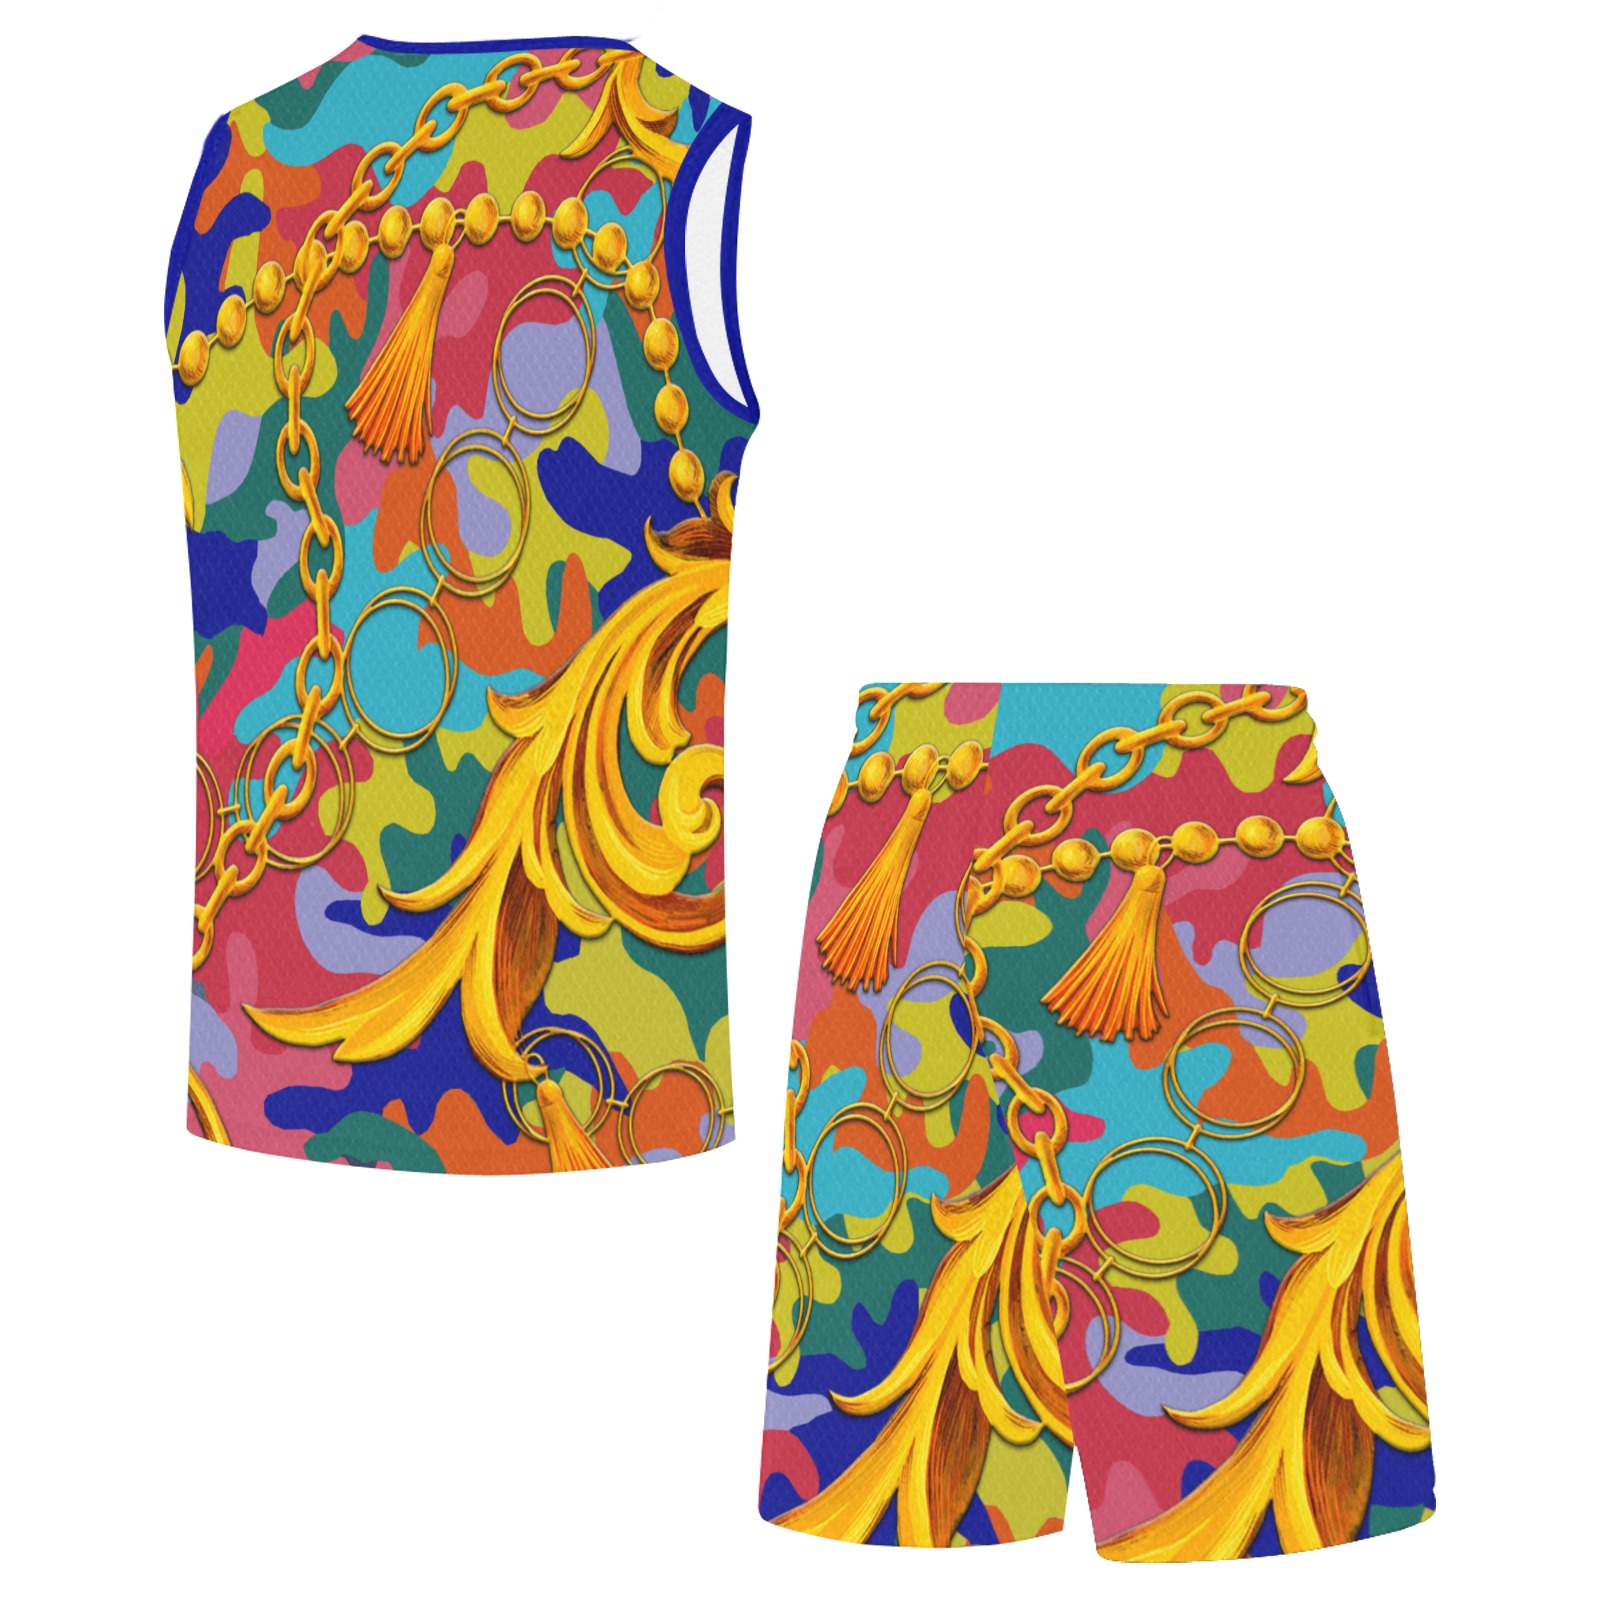 Colorful Camo, Exclusive Collectable Fly Basketball Uniform with Pocket